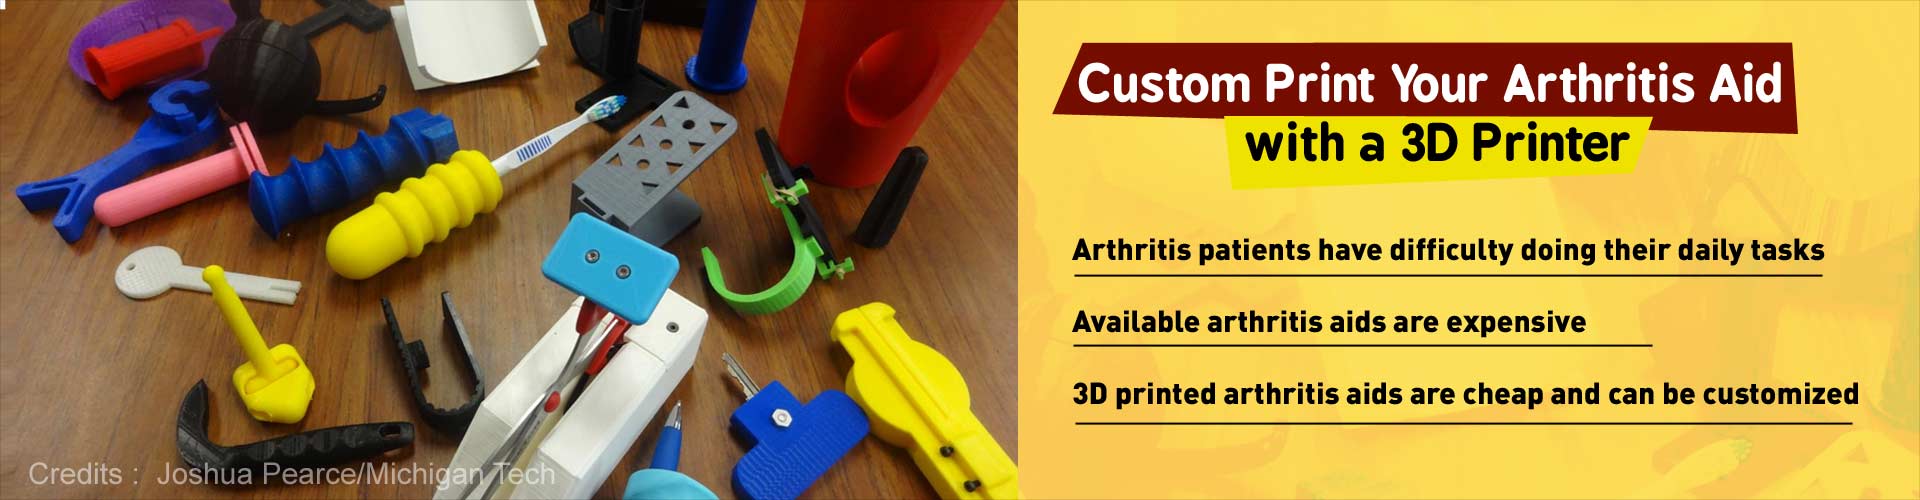 Custom print your arthritis aid with a 3D printer. Arthritis patients have difficulty doing their daily tasks. Available arthritis aids are expensive. 3D printed arthritis aids are cheap and can be customized.